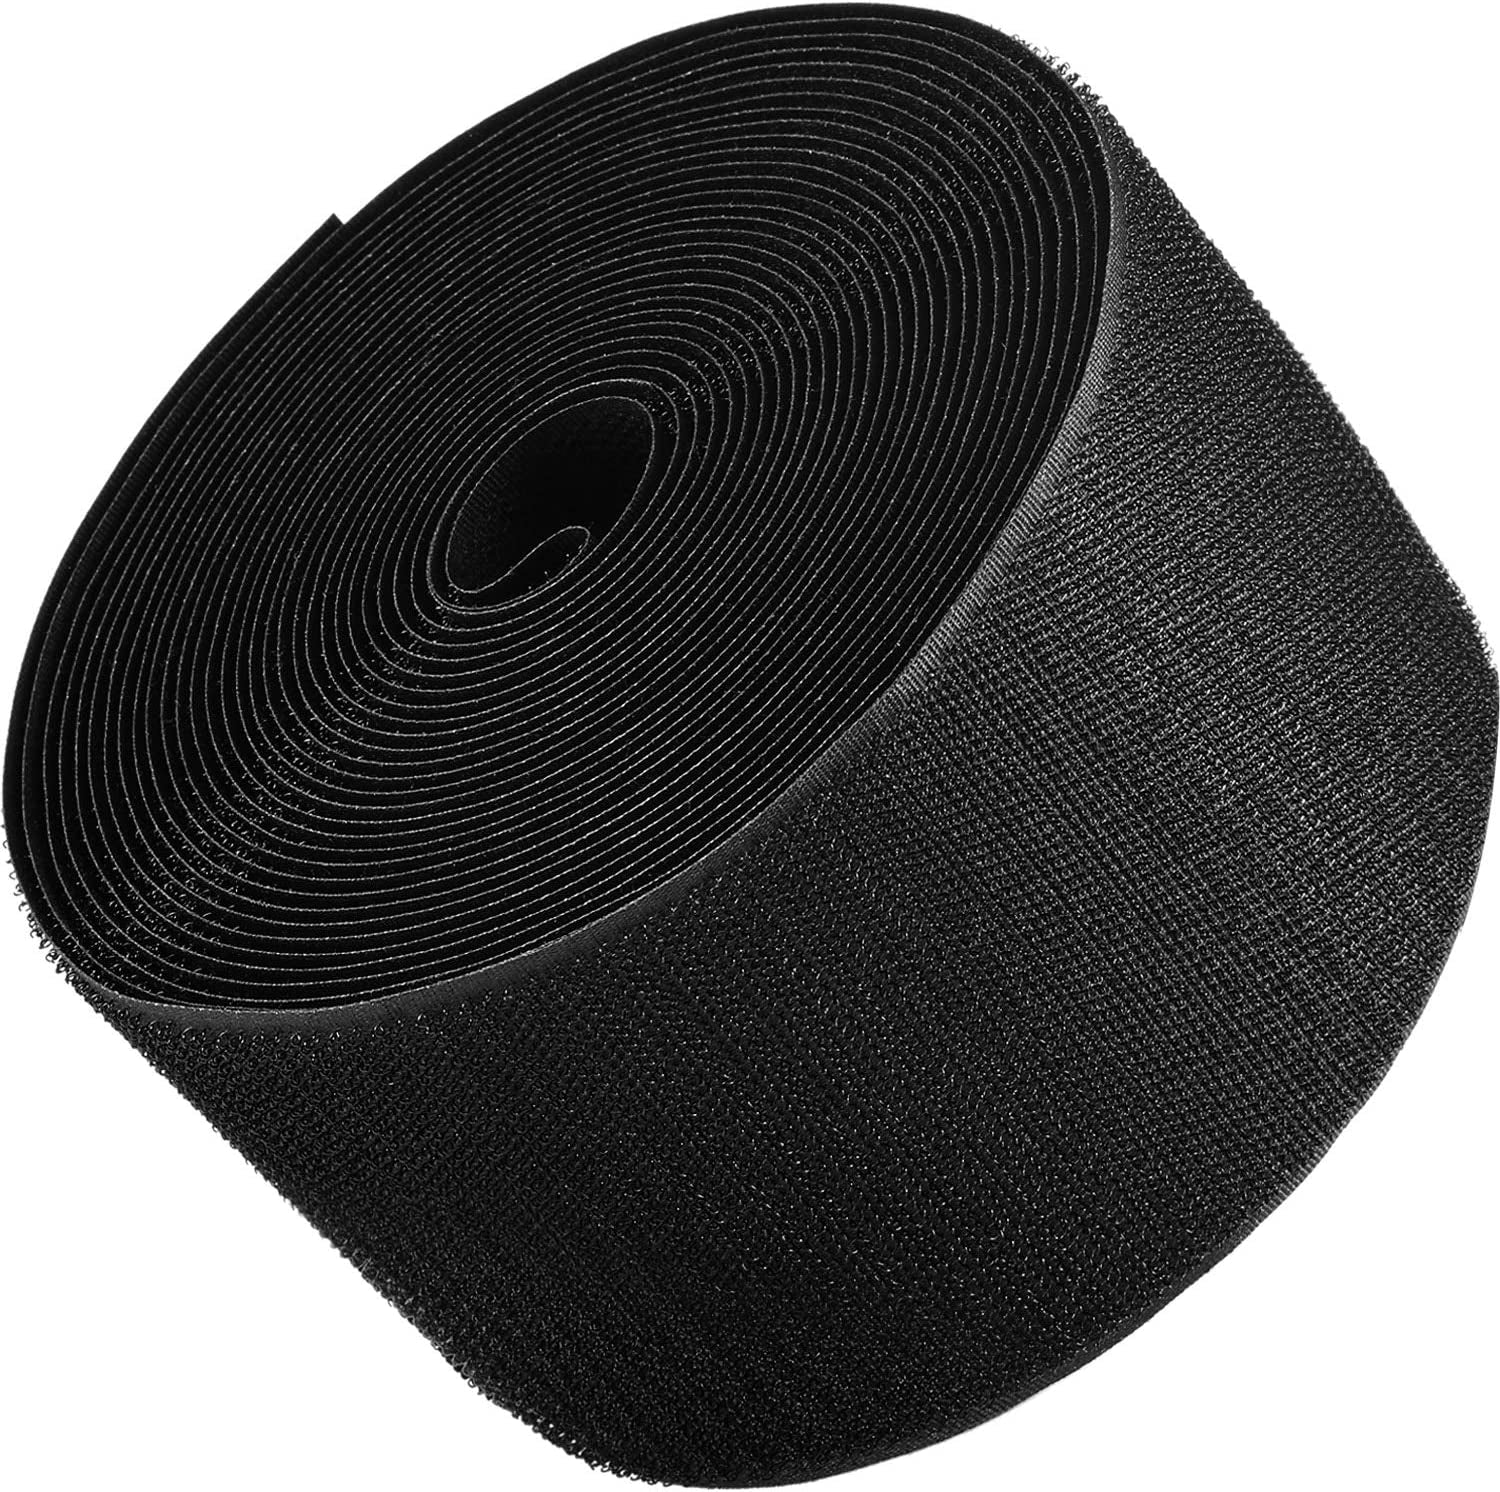 WILLBOND, 1 Piece (24 Feet in Length) Black Cable Floor Strip Carpet Floor Cord Cover Cable Protector Cable Management, Protect Cords and Prevent a Trip Hazard